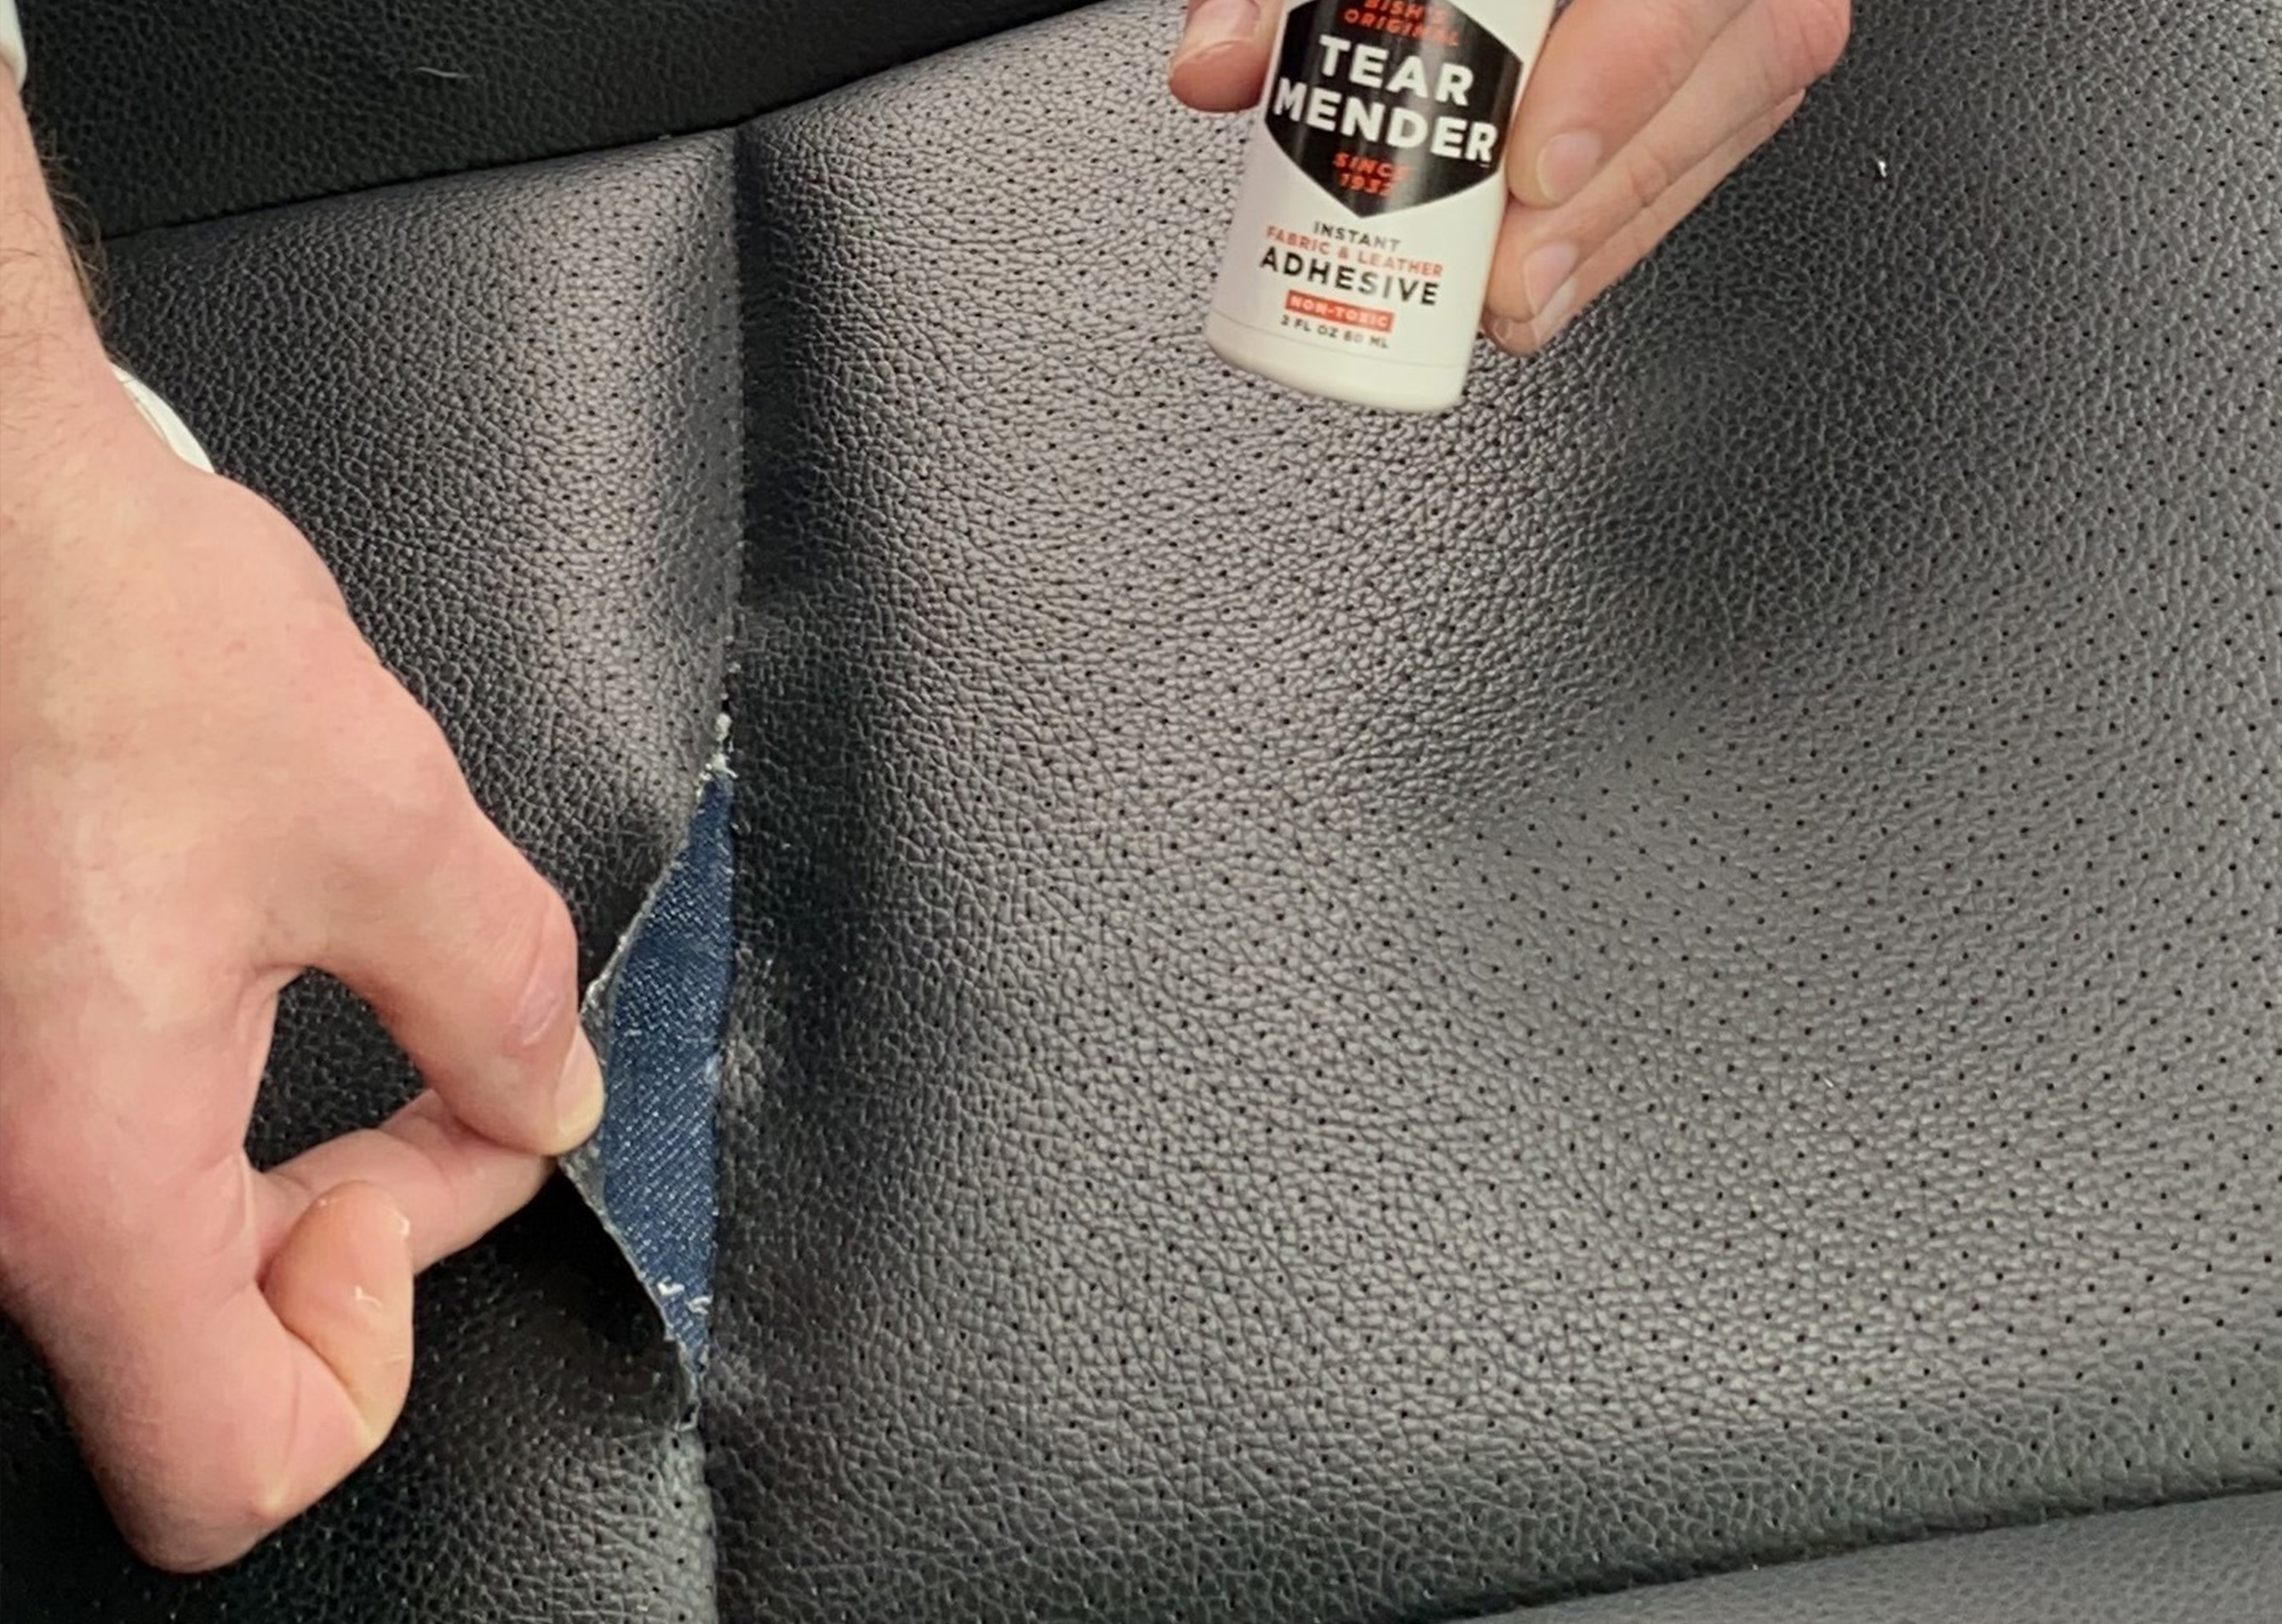 How To Correctly Repair Damaged & Cracked Car Leather Seats 